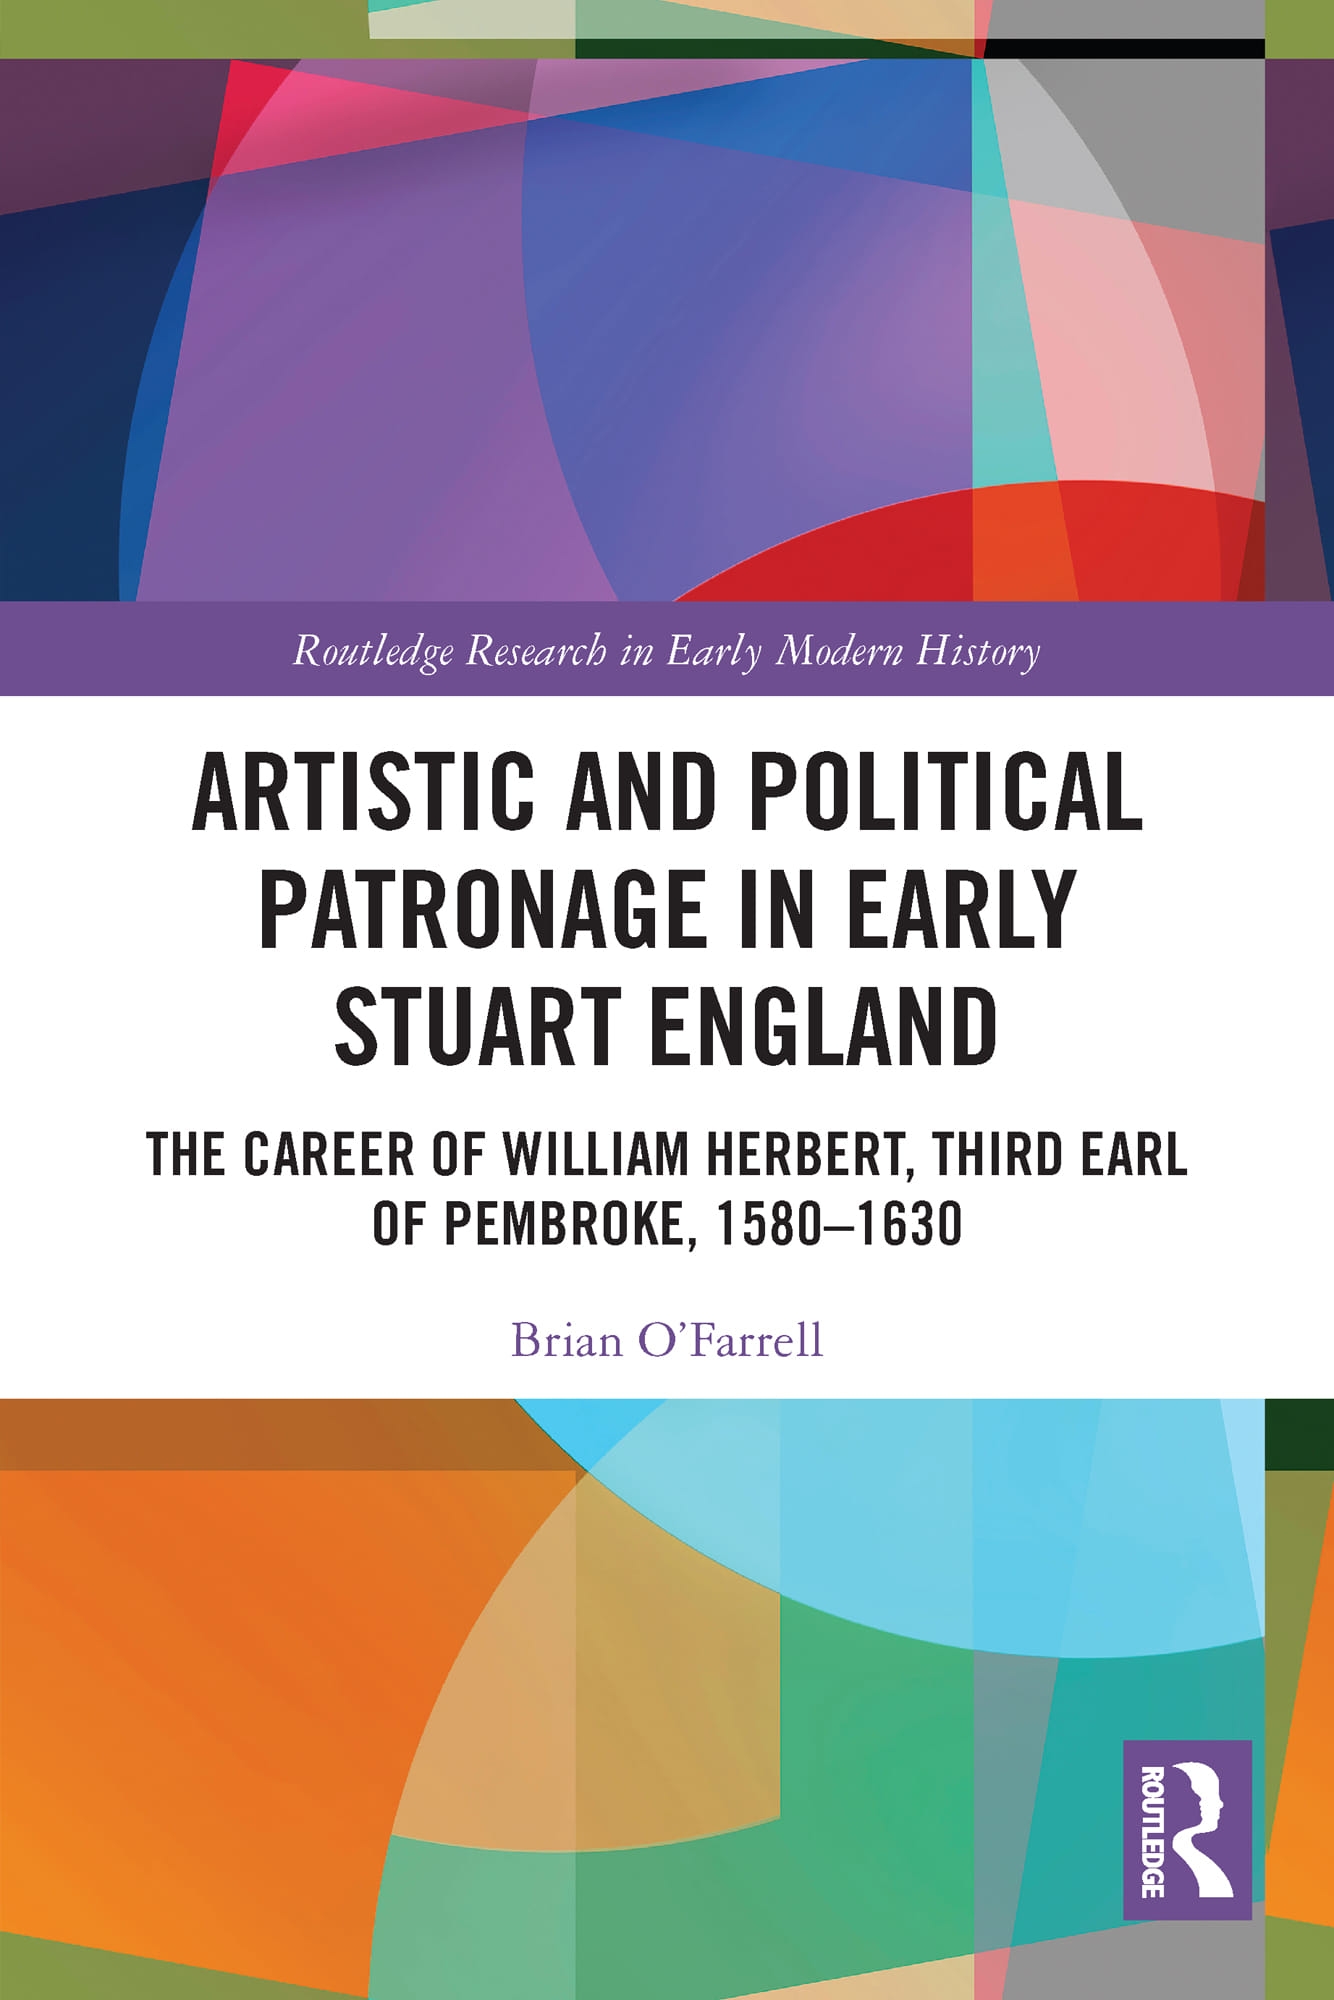 Artistic and Political Patronage in Early Stuart England: The Career of William Herbert, Third Earl of Pembroke, 1580-1630